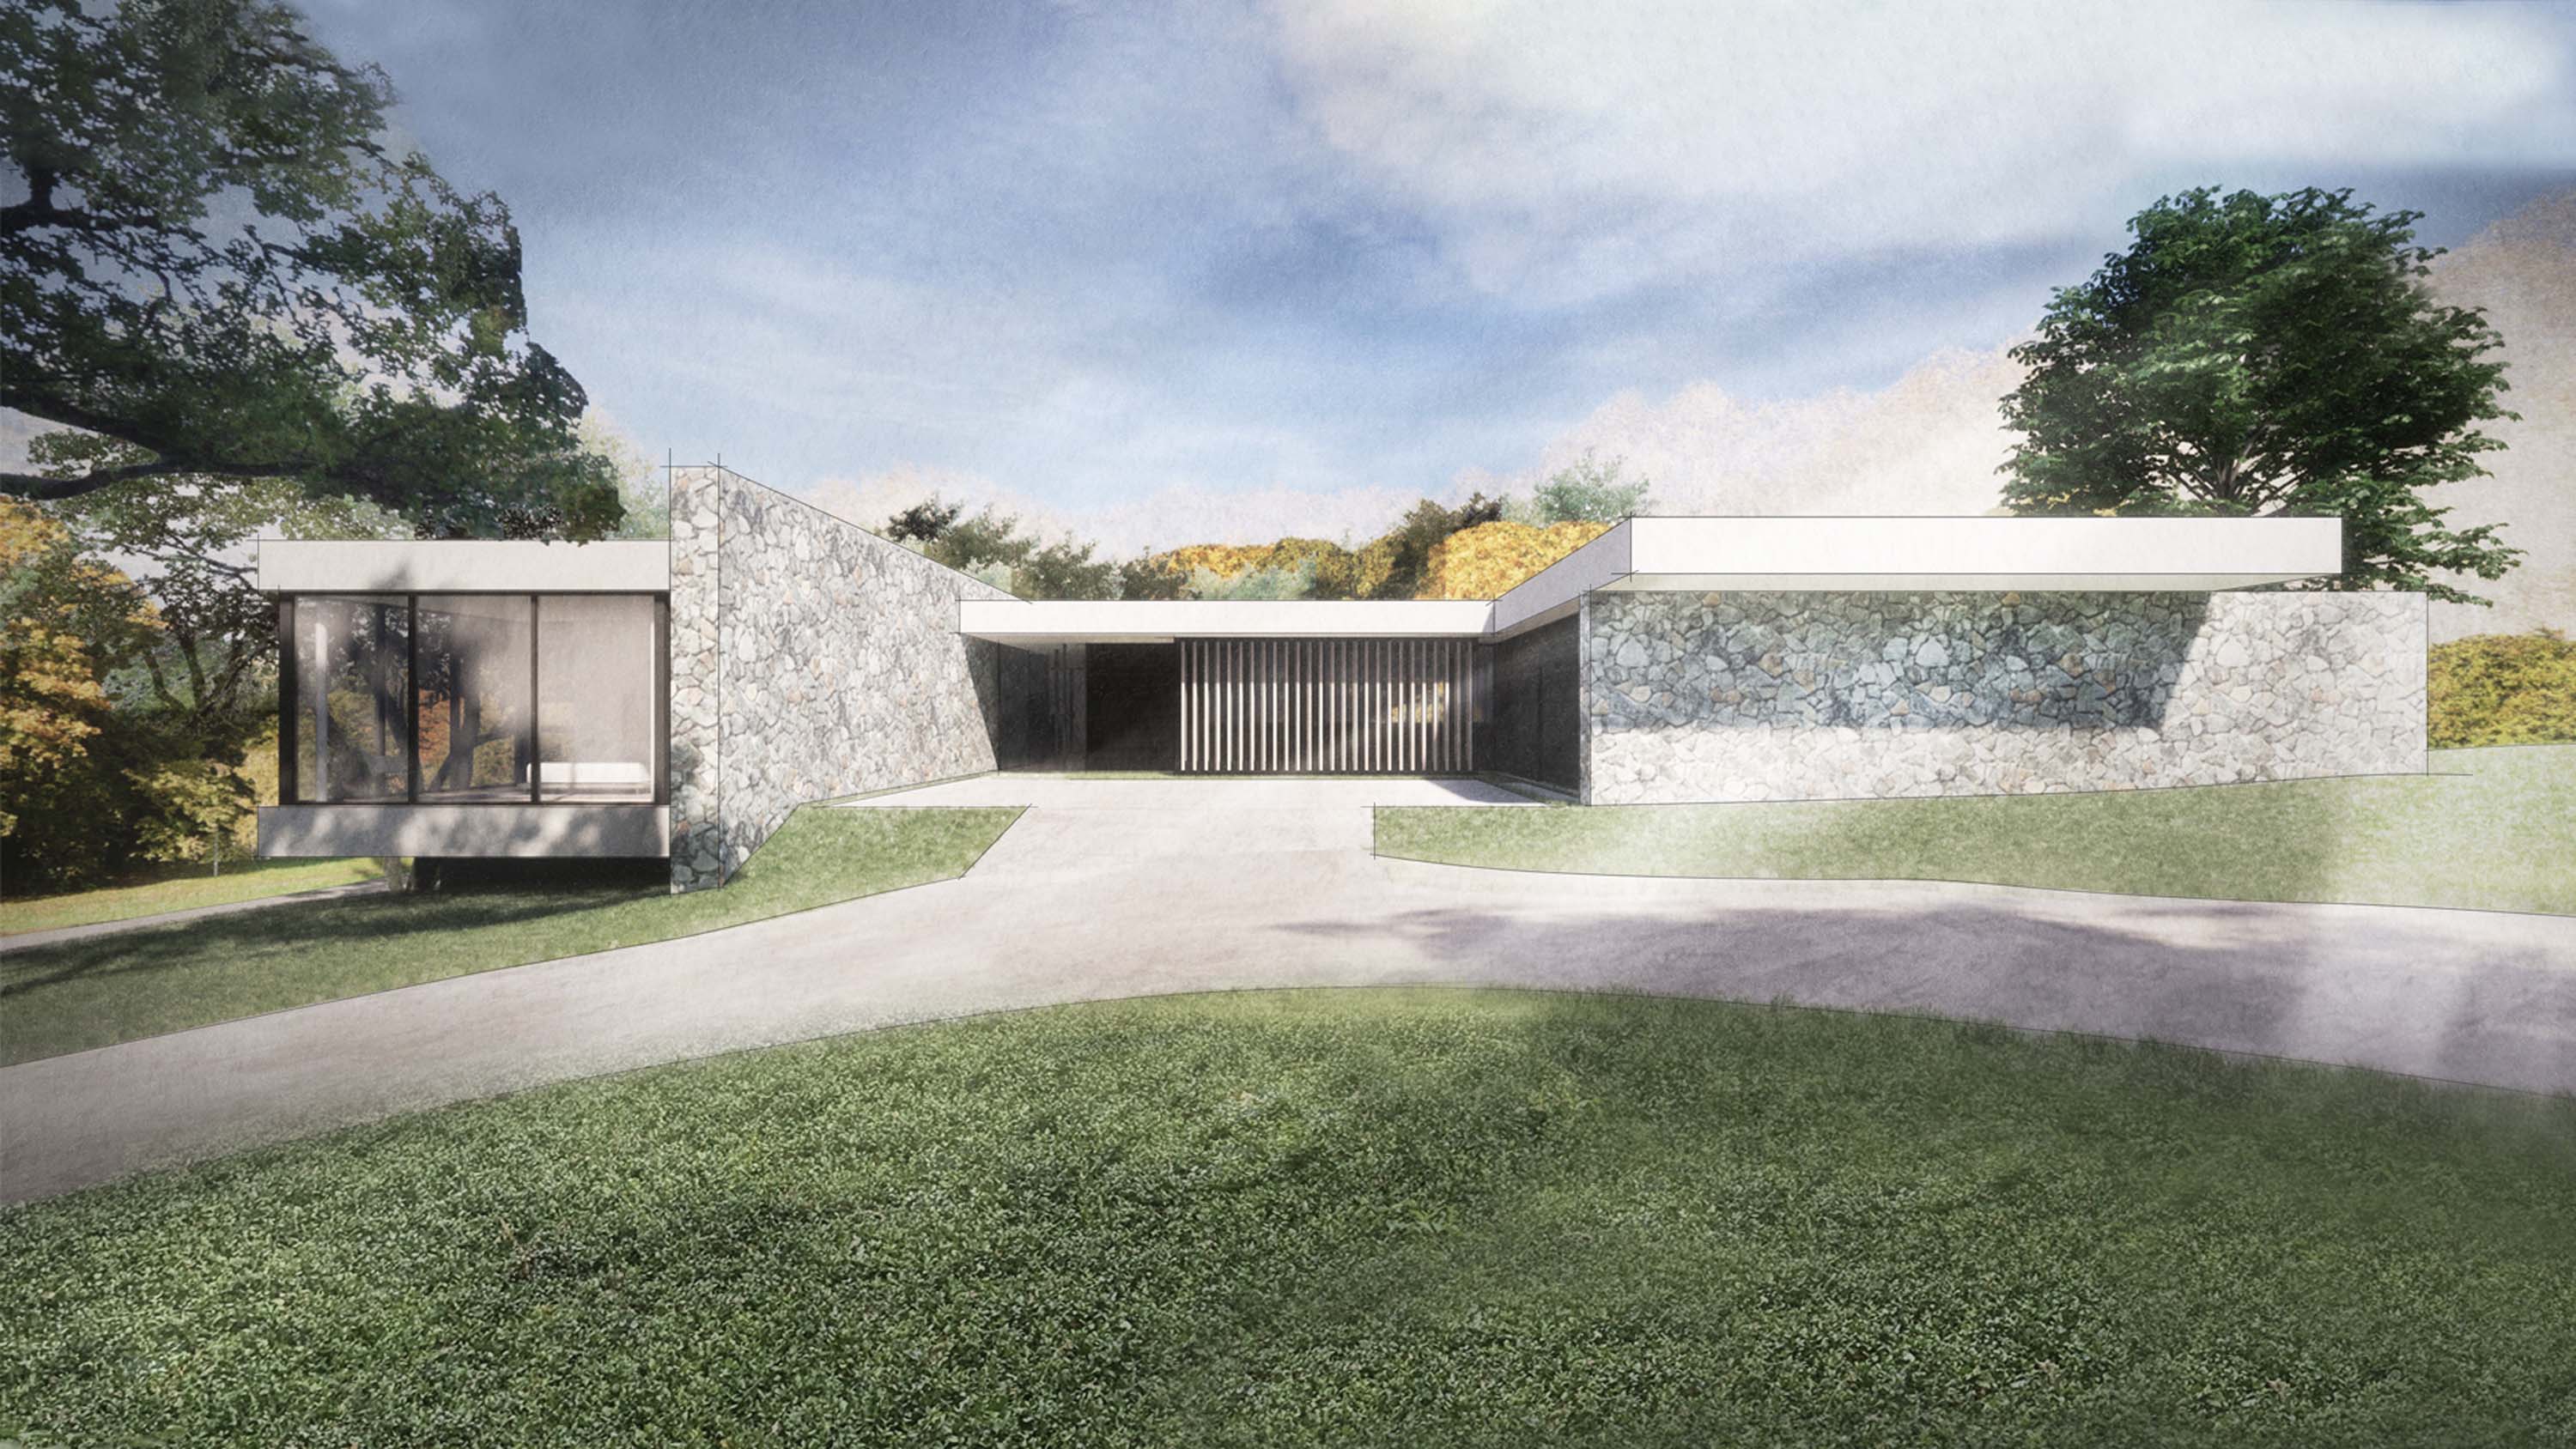 Exterior rendering of Mira Vista House by Specht Novak Architects. This house features mid-century design and dry stack stone that blends the structure in its surroundings.